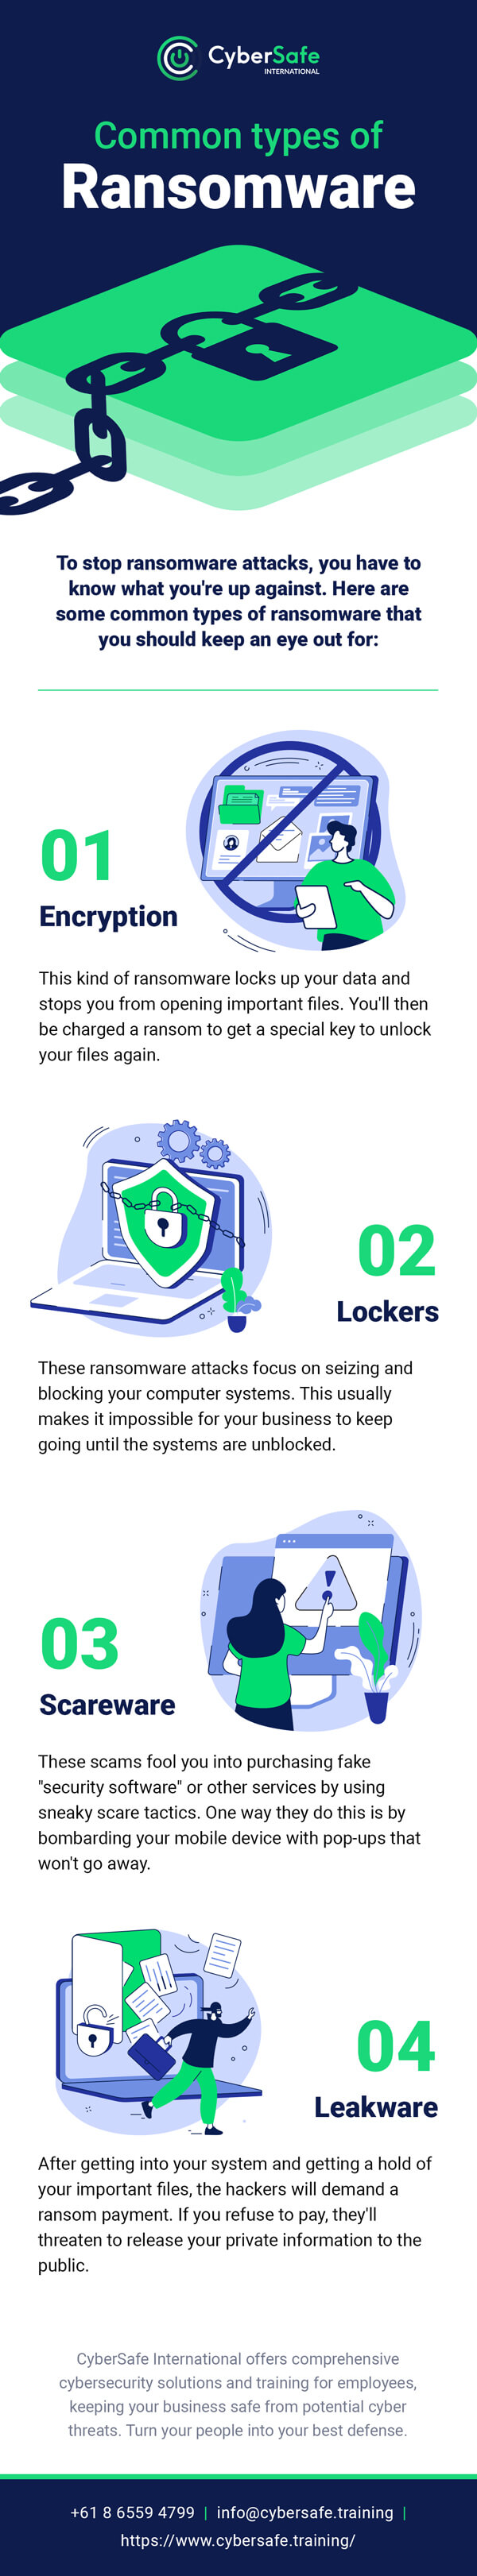 infographic outlining the common types of ransomware that could affect businesses